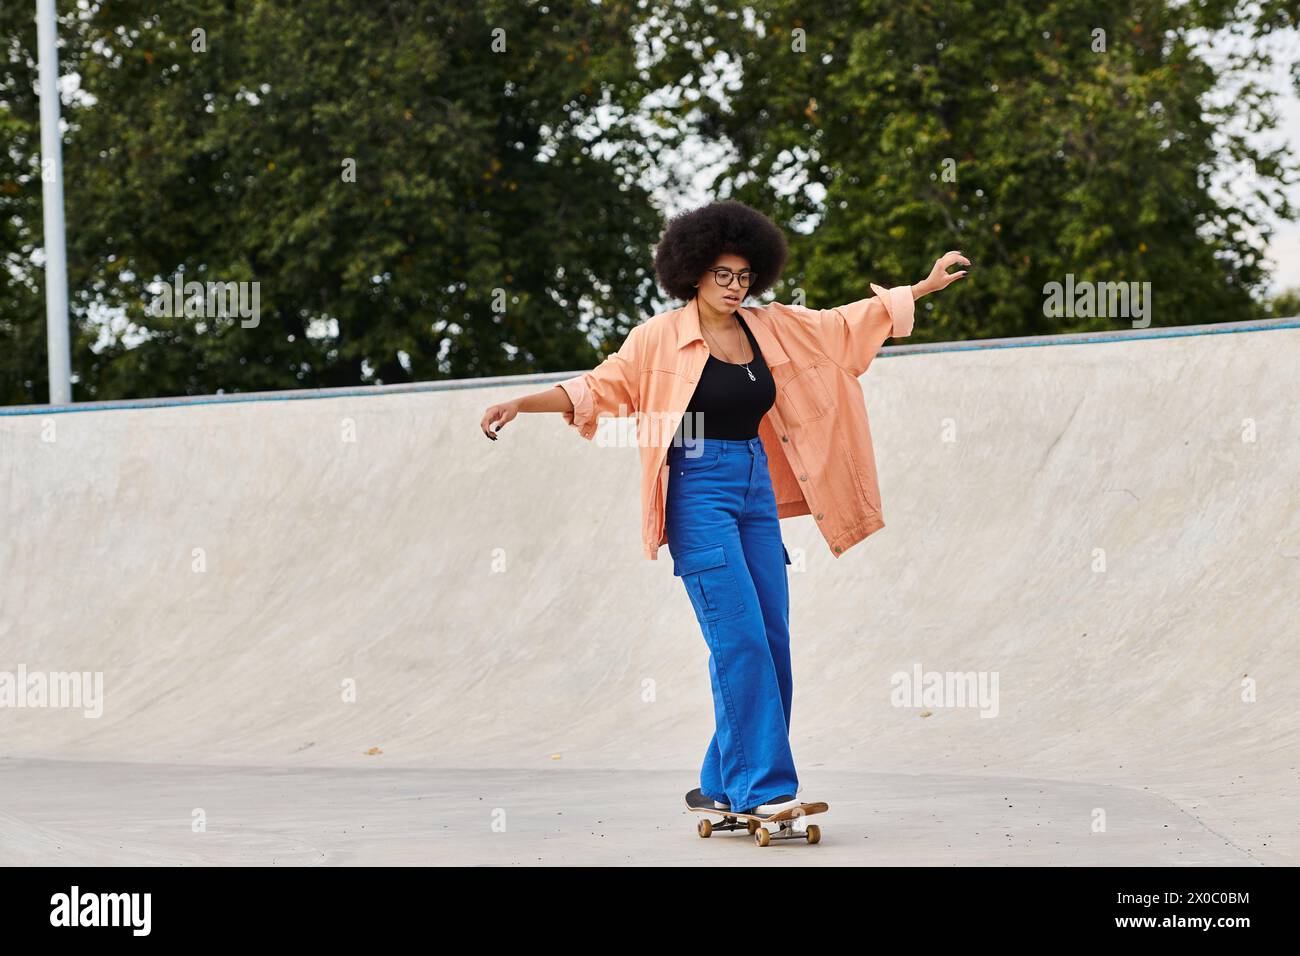 A young African American woman with curly hair confidently rides a skateboard at a vibrant skate park. Stock Photo